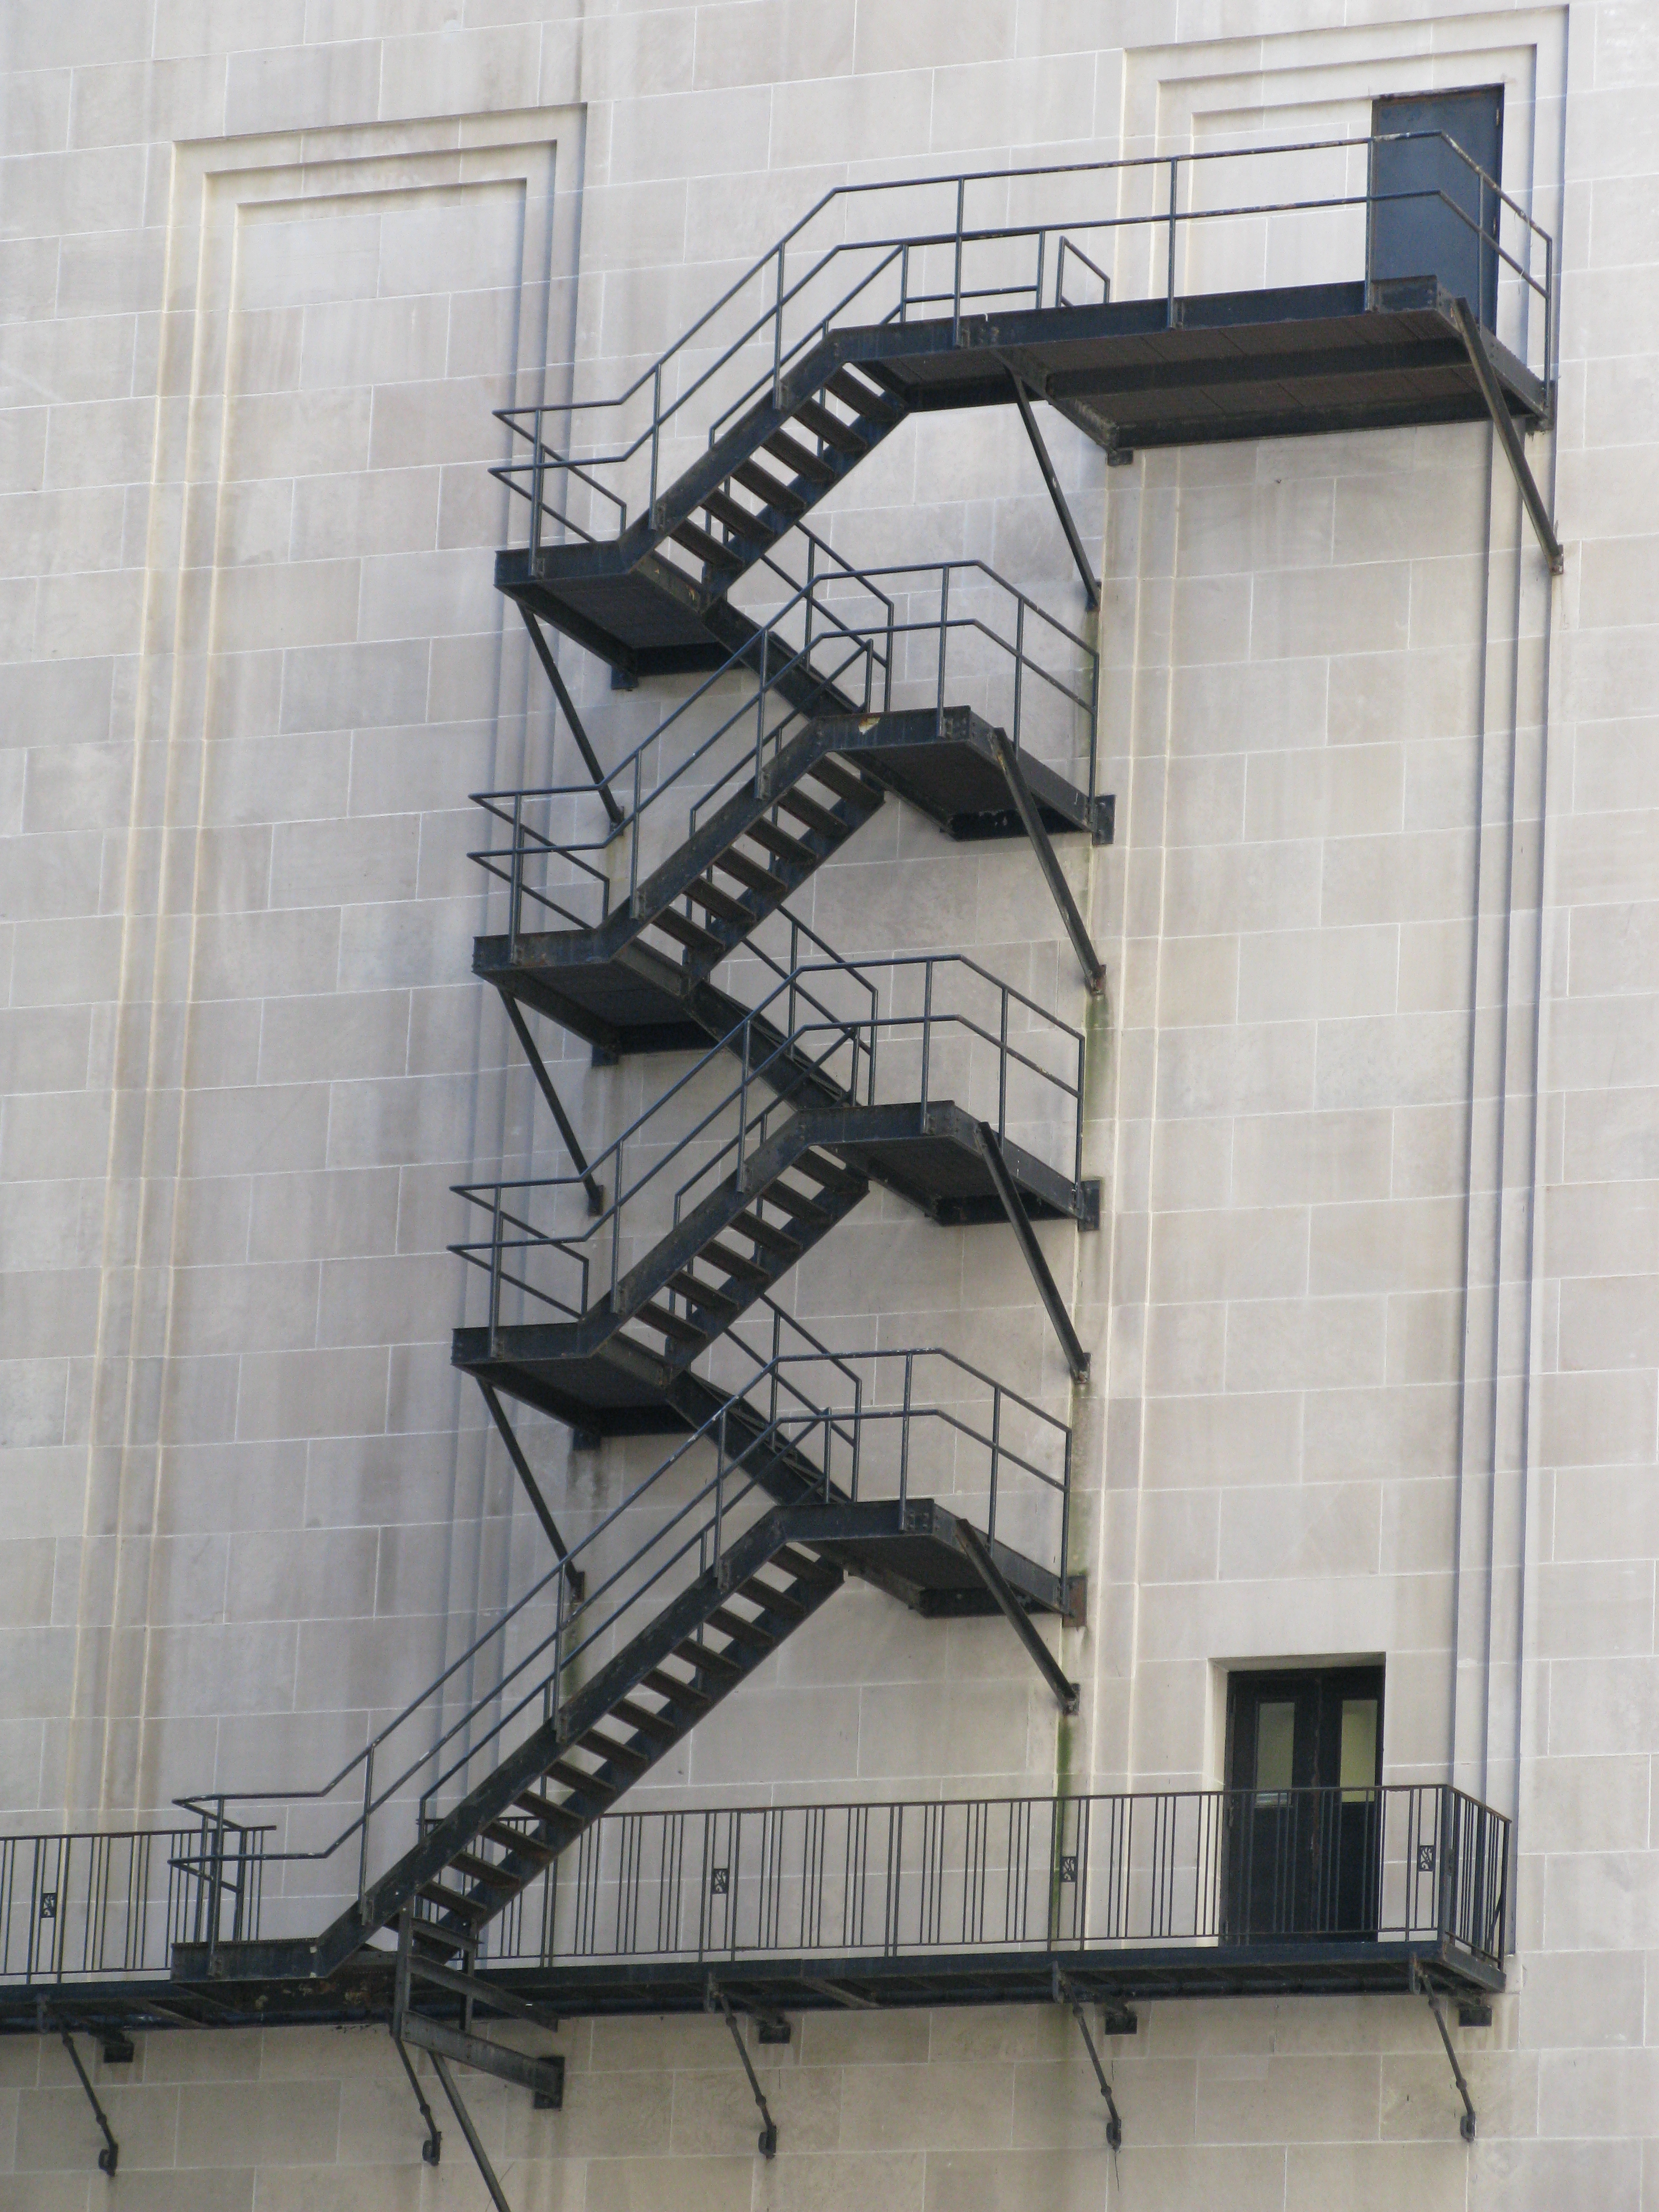 File:Chicago Board of Trade Fire Escape Stairs.jpg - Wikimedia Commons